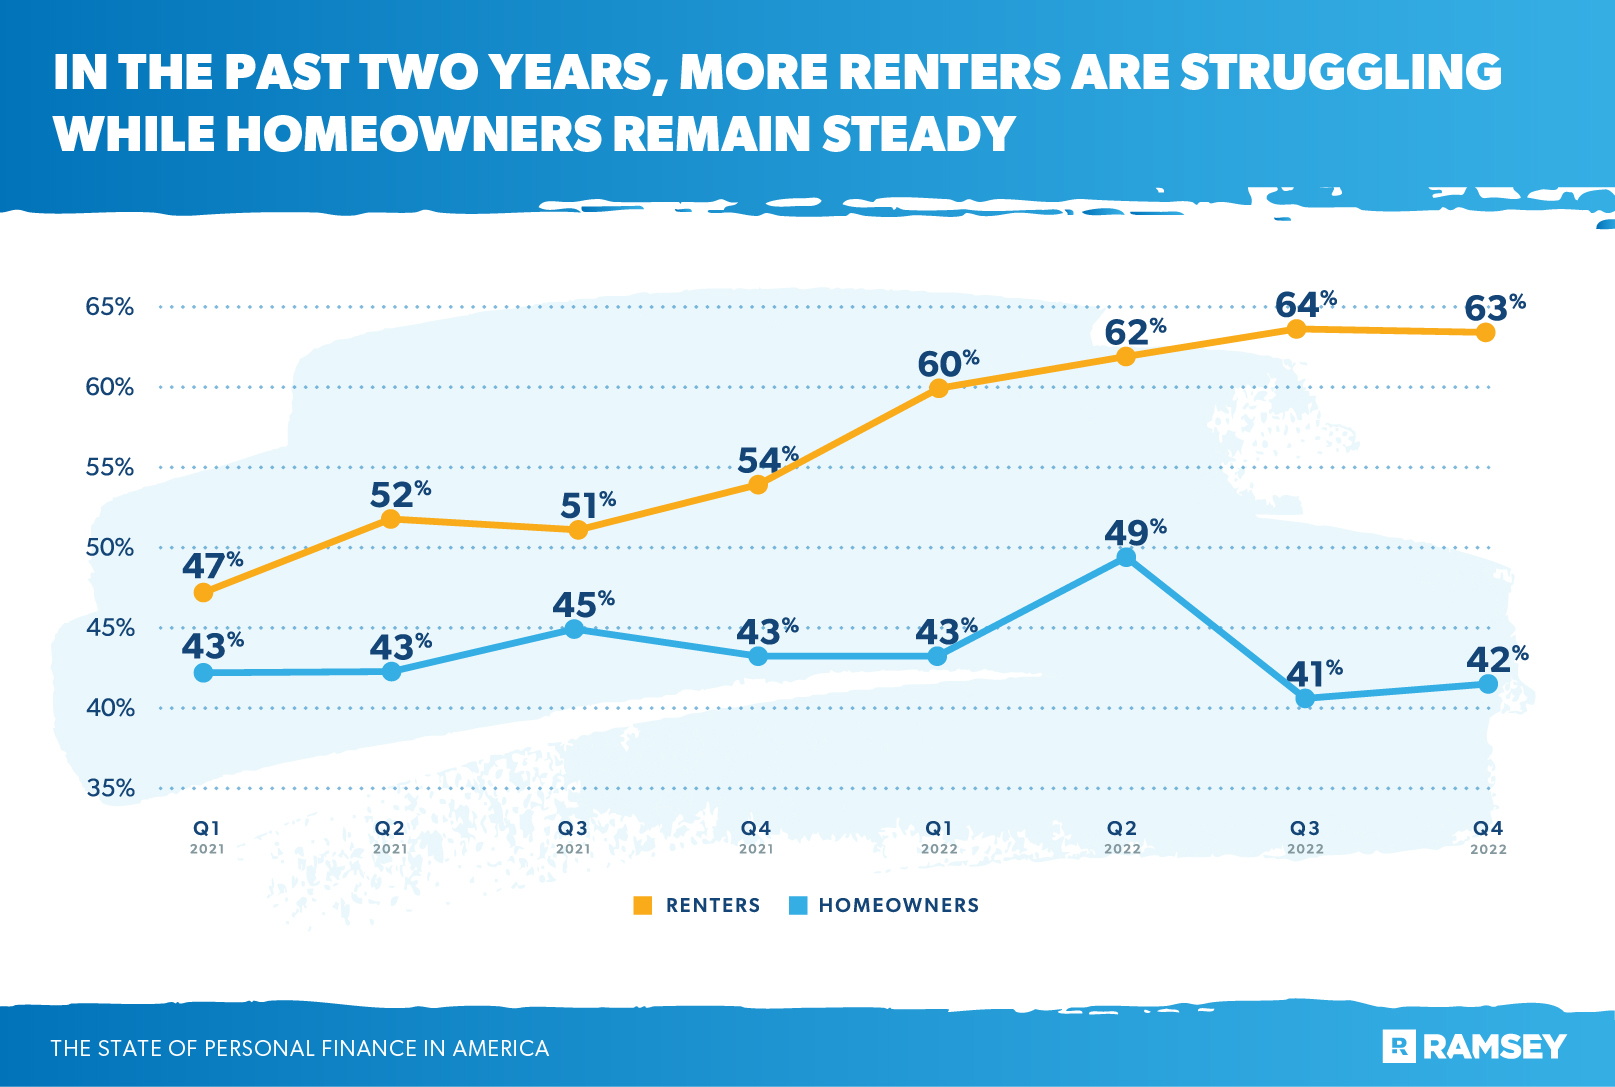 in the past two years, more renters are struggling while homeowners remain steady